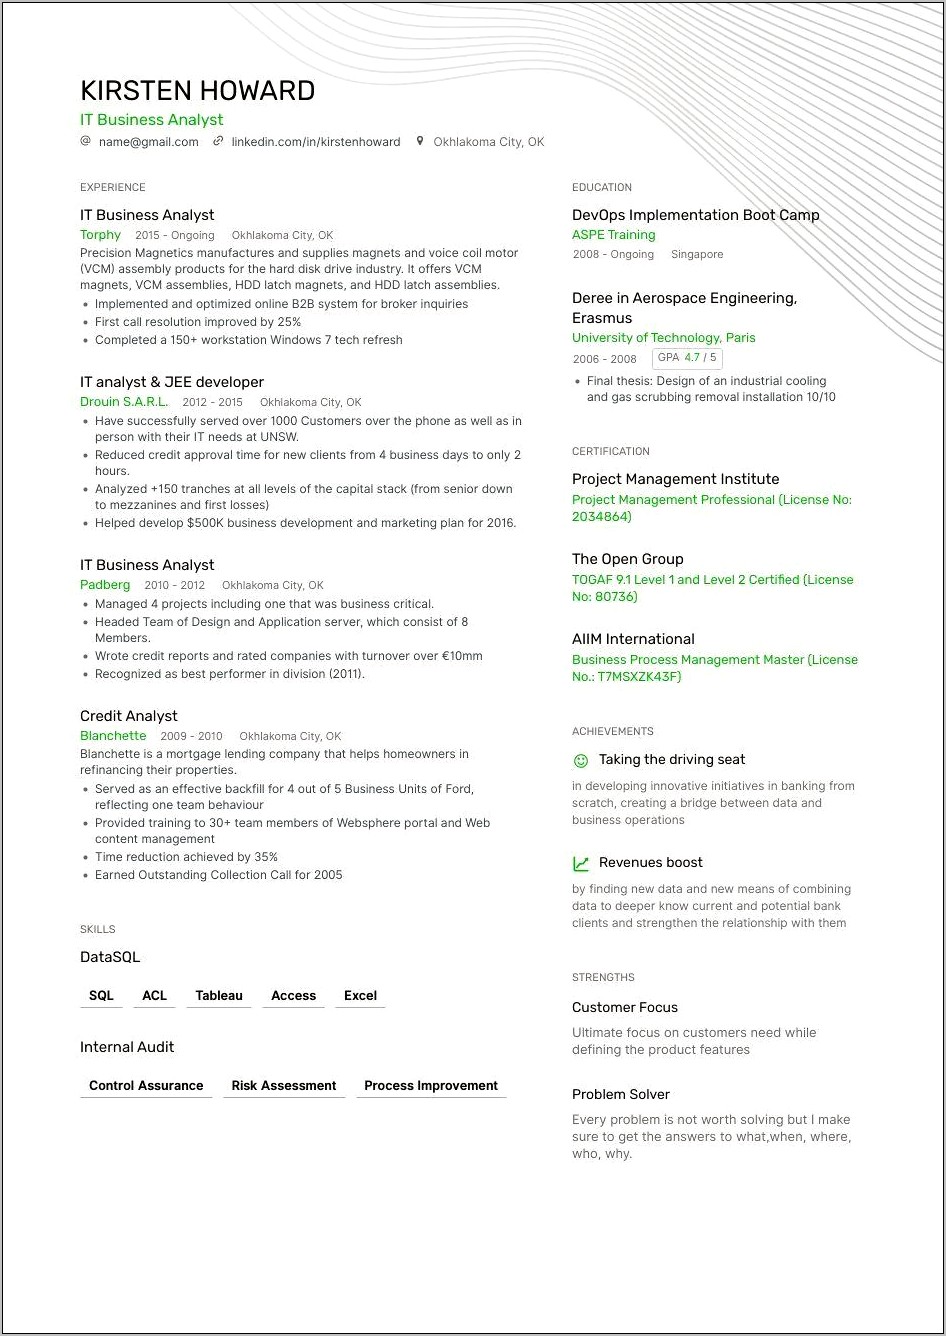 Resume Of Business Analyst Samples